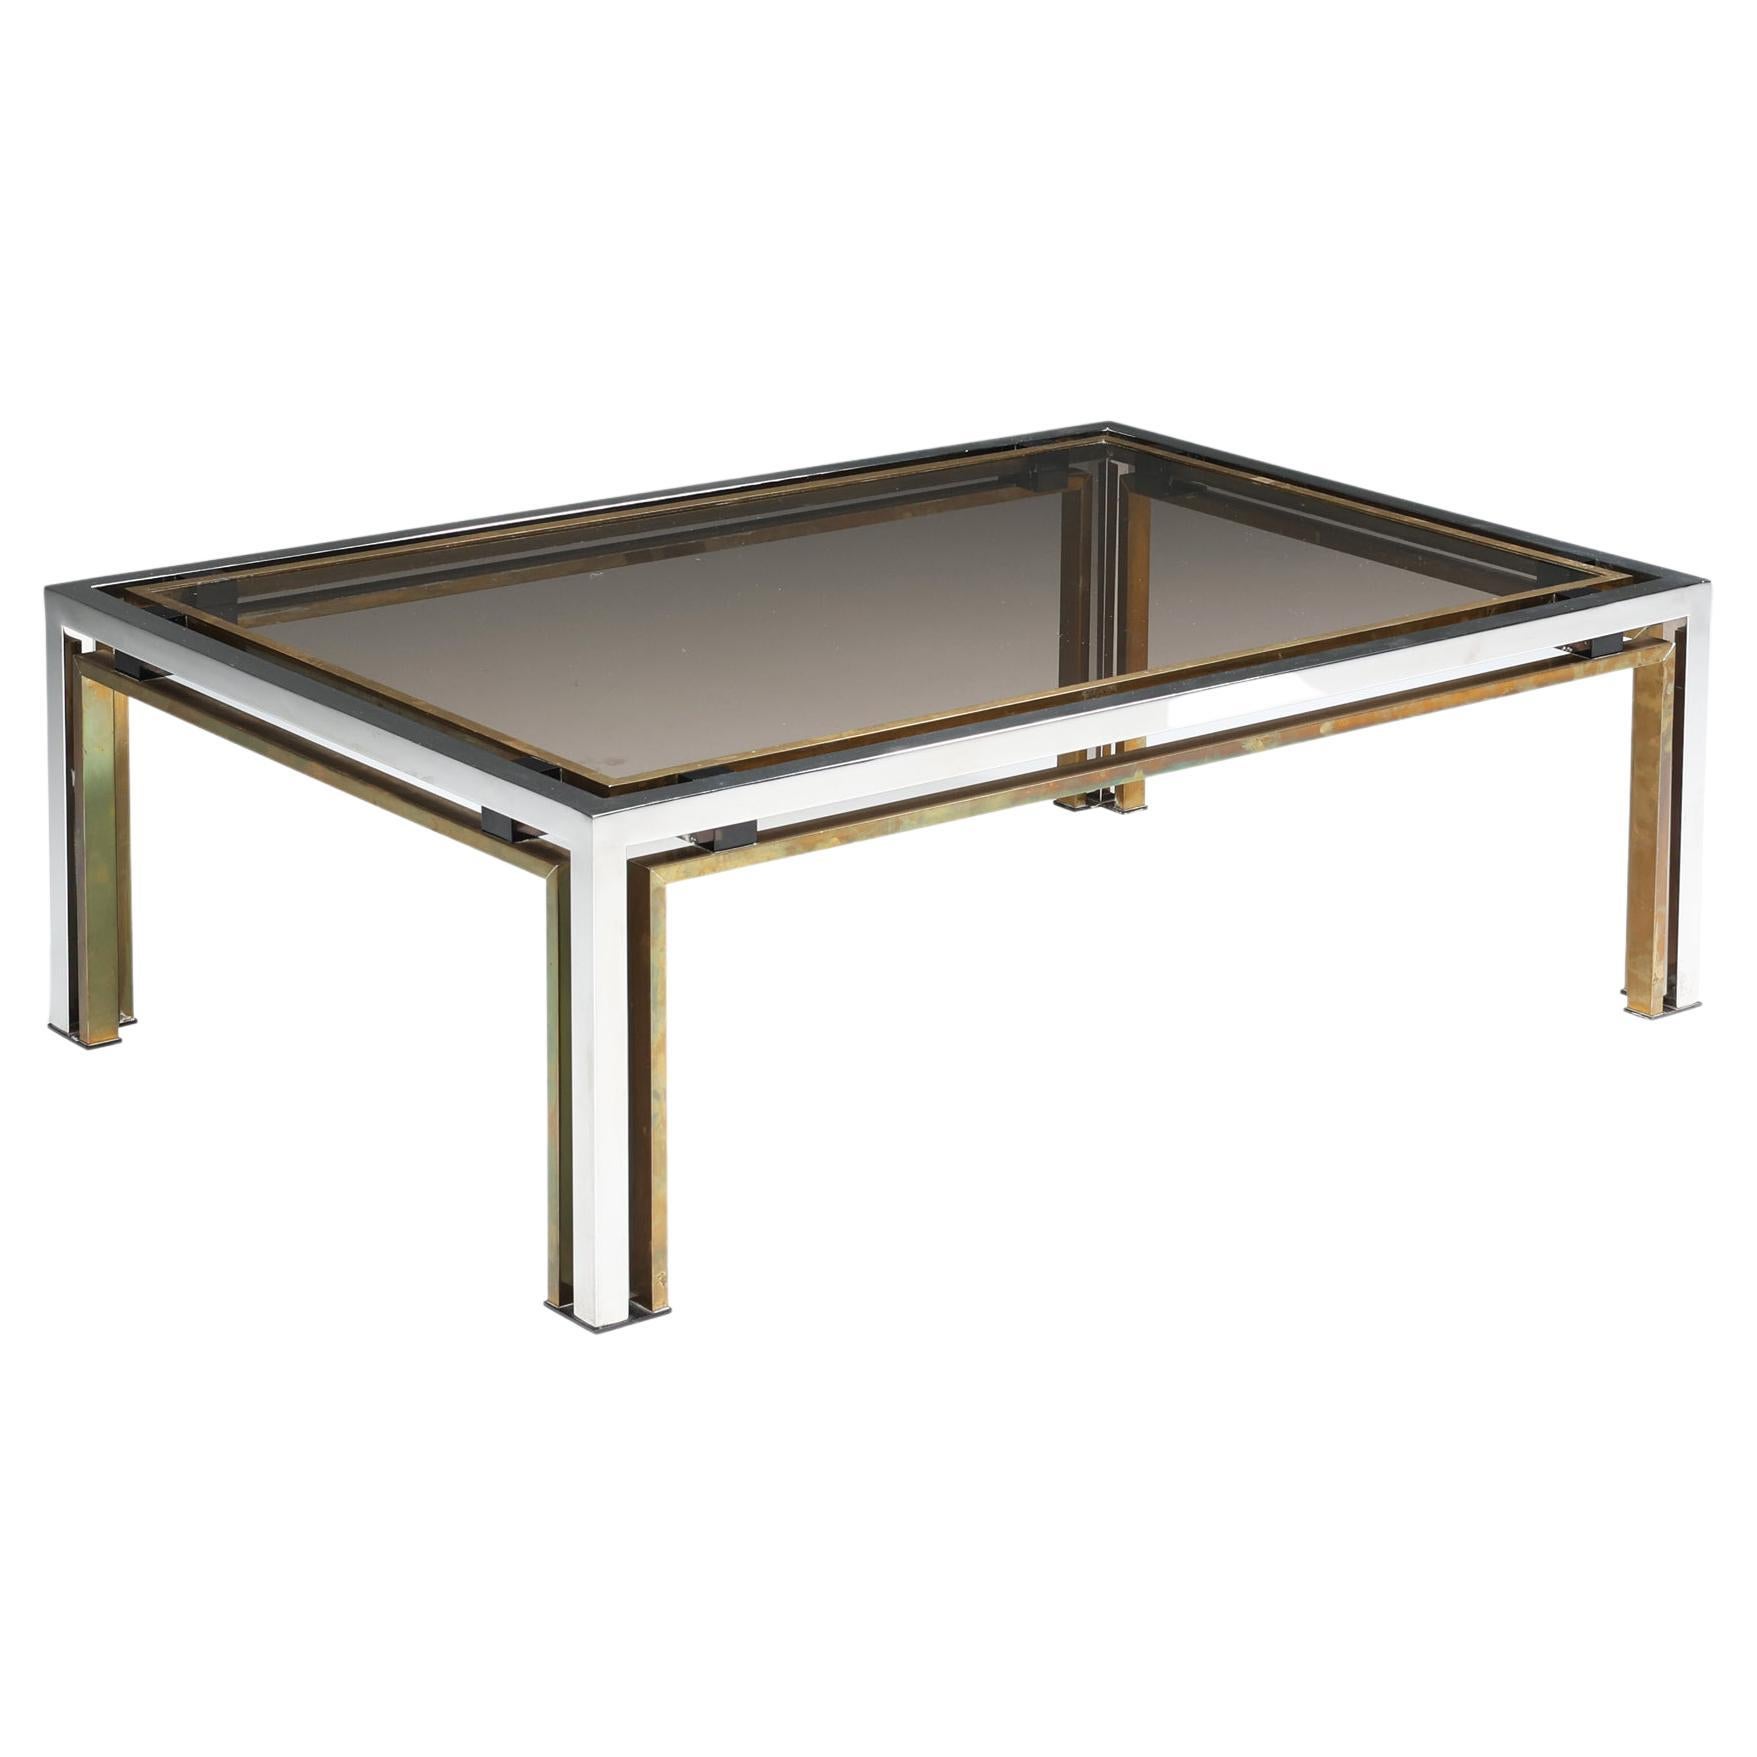 Hollywood Regency Romeo Rega Coffee Table in Brass and Glass, 1970's For Sale